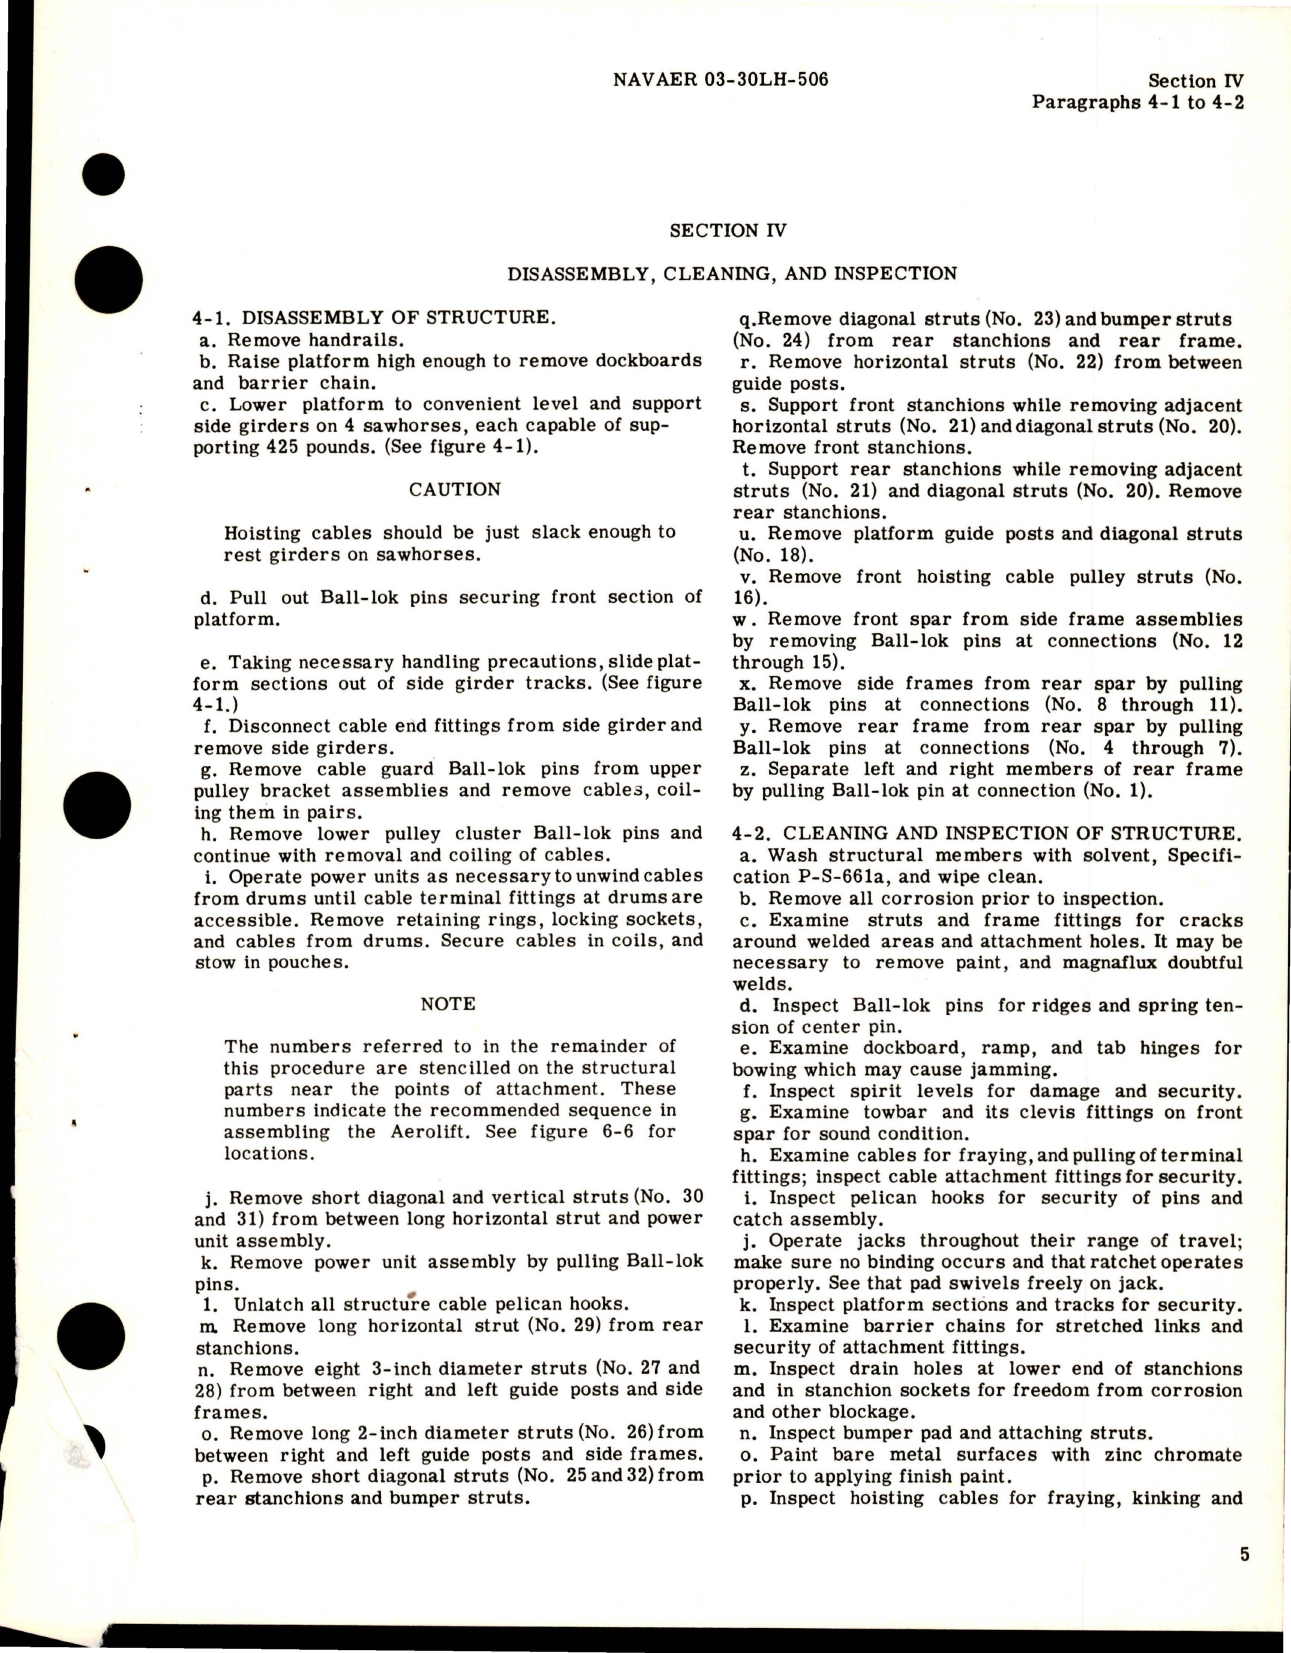 Sample page 9 from AirCorps Library document: Overhaul Instructions for Aerolift Cargo Elevator - 319950